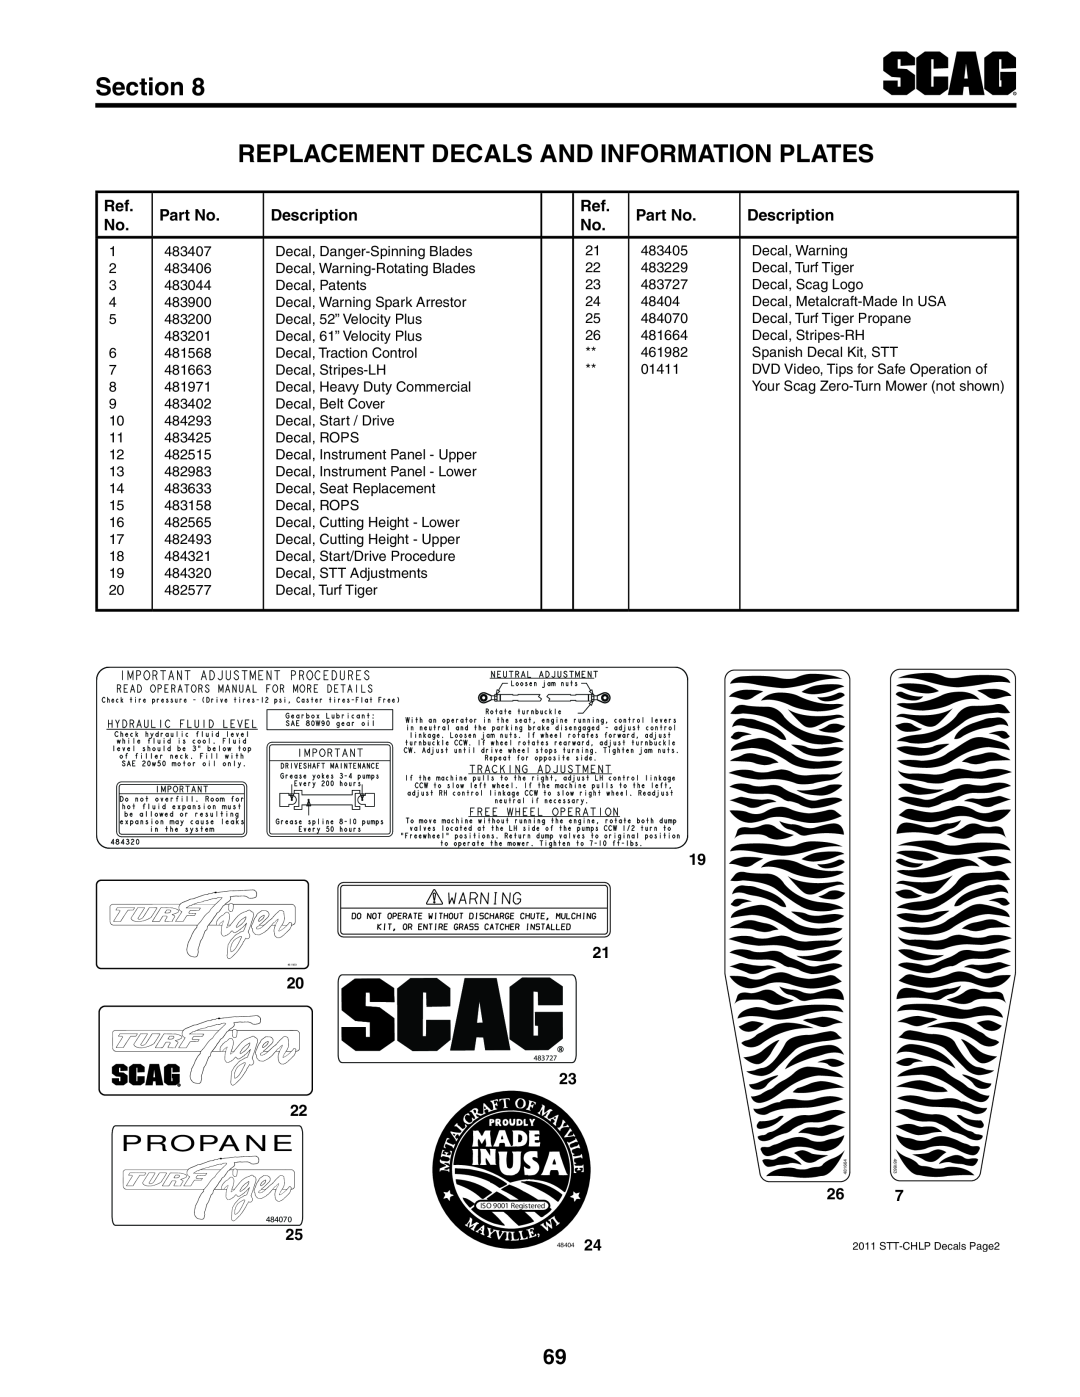 Scag Power Equipment STT61V-25CH-LP Section REPLACEMENT DECALS AND INFORMATION PLATES, Propane, Description 